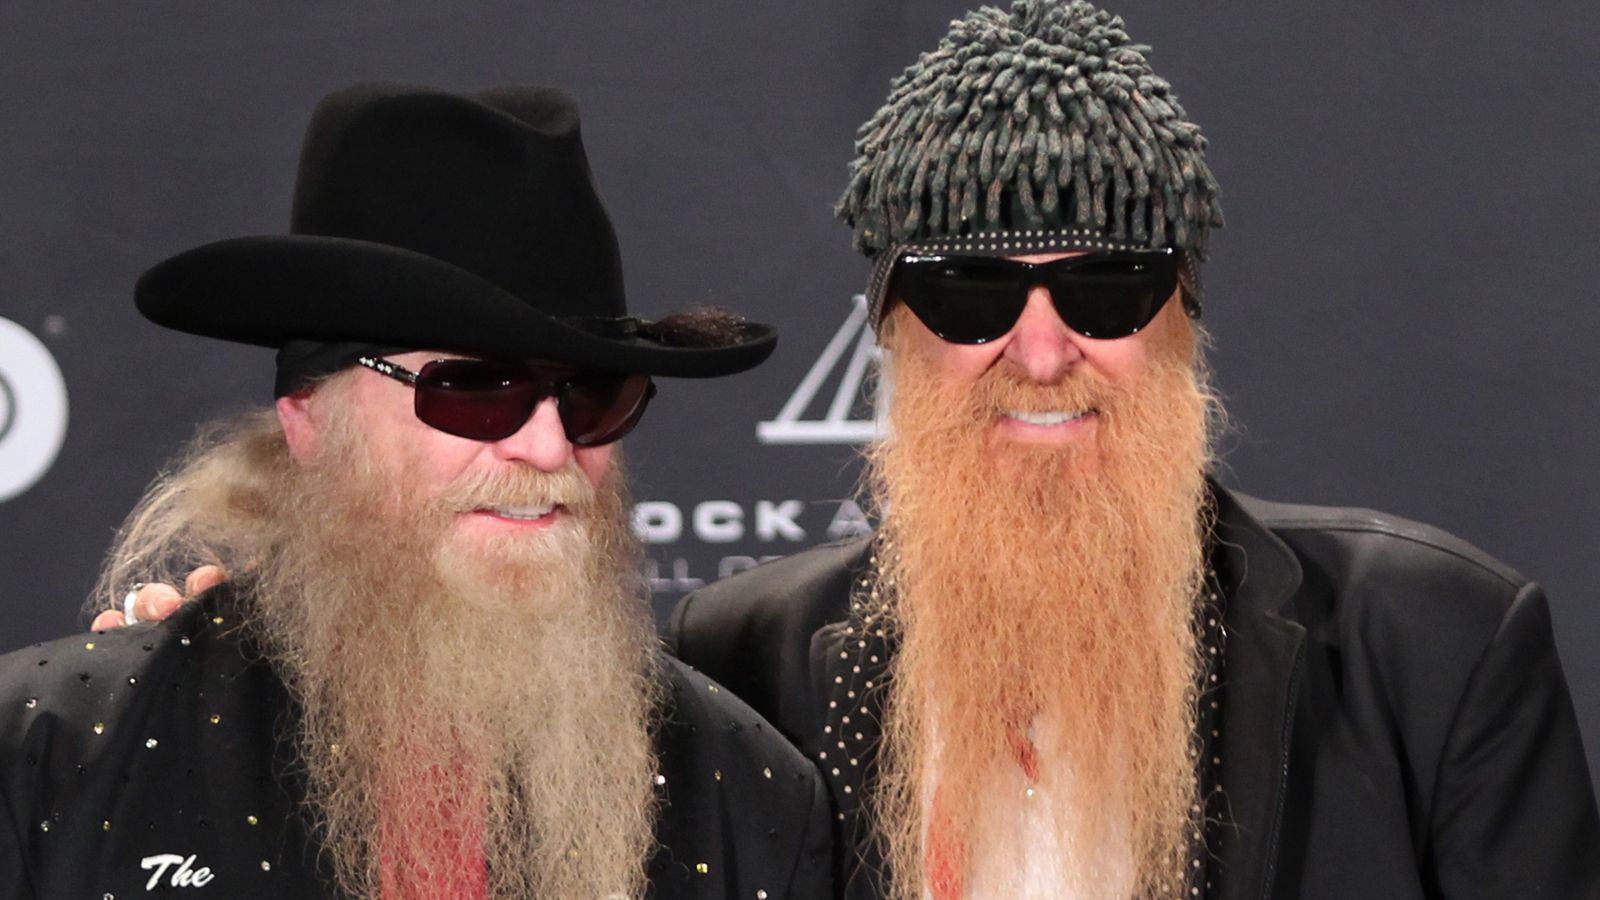 ZZ Top bassist Dusty Hill has died aged 72, says US rock group Brief